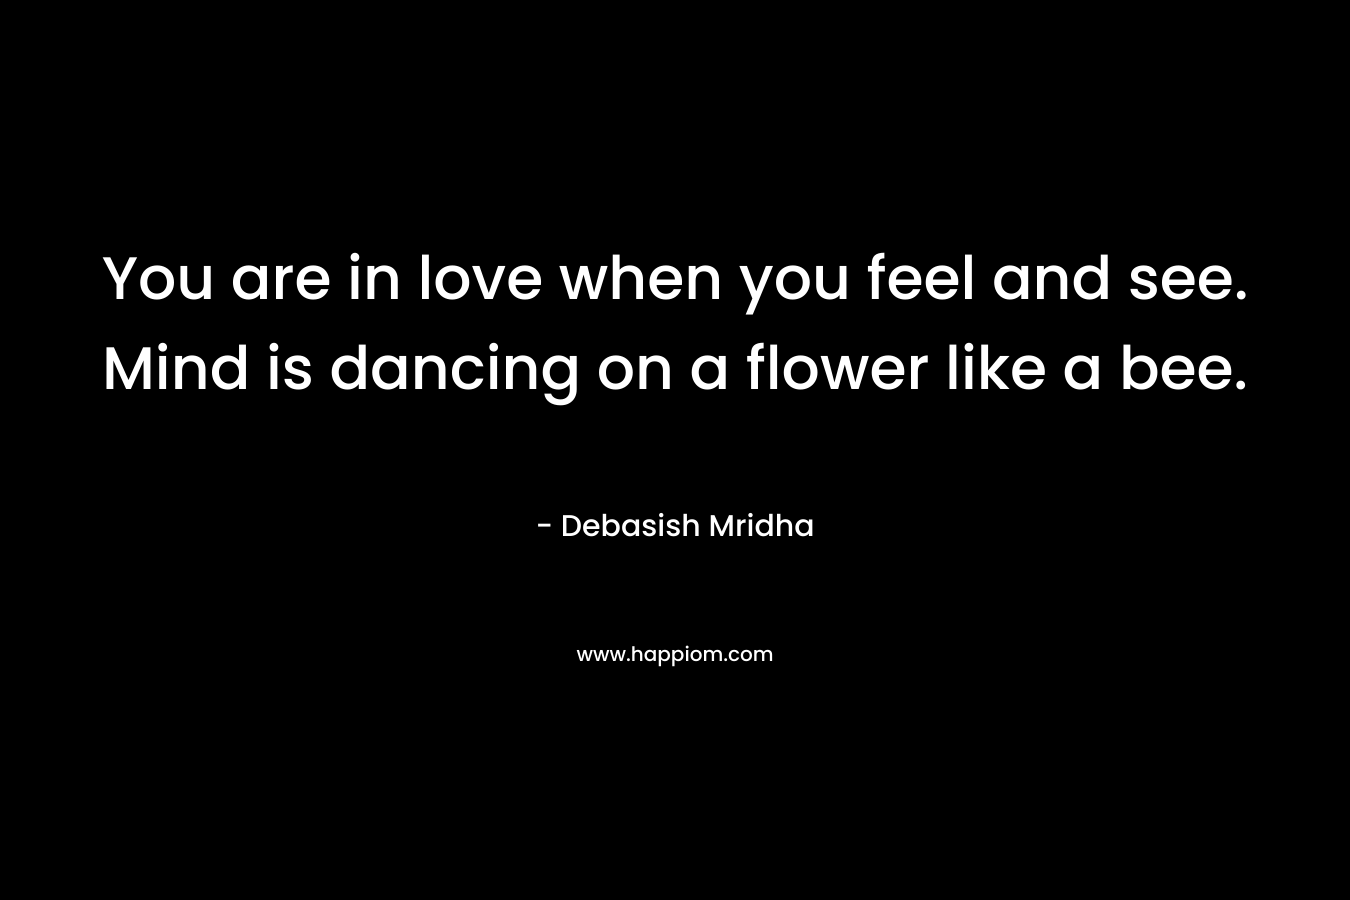 You are in love when you feel and see. Mind is dancing on a flower like a bee. – Debasish Mridha